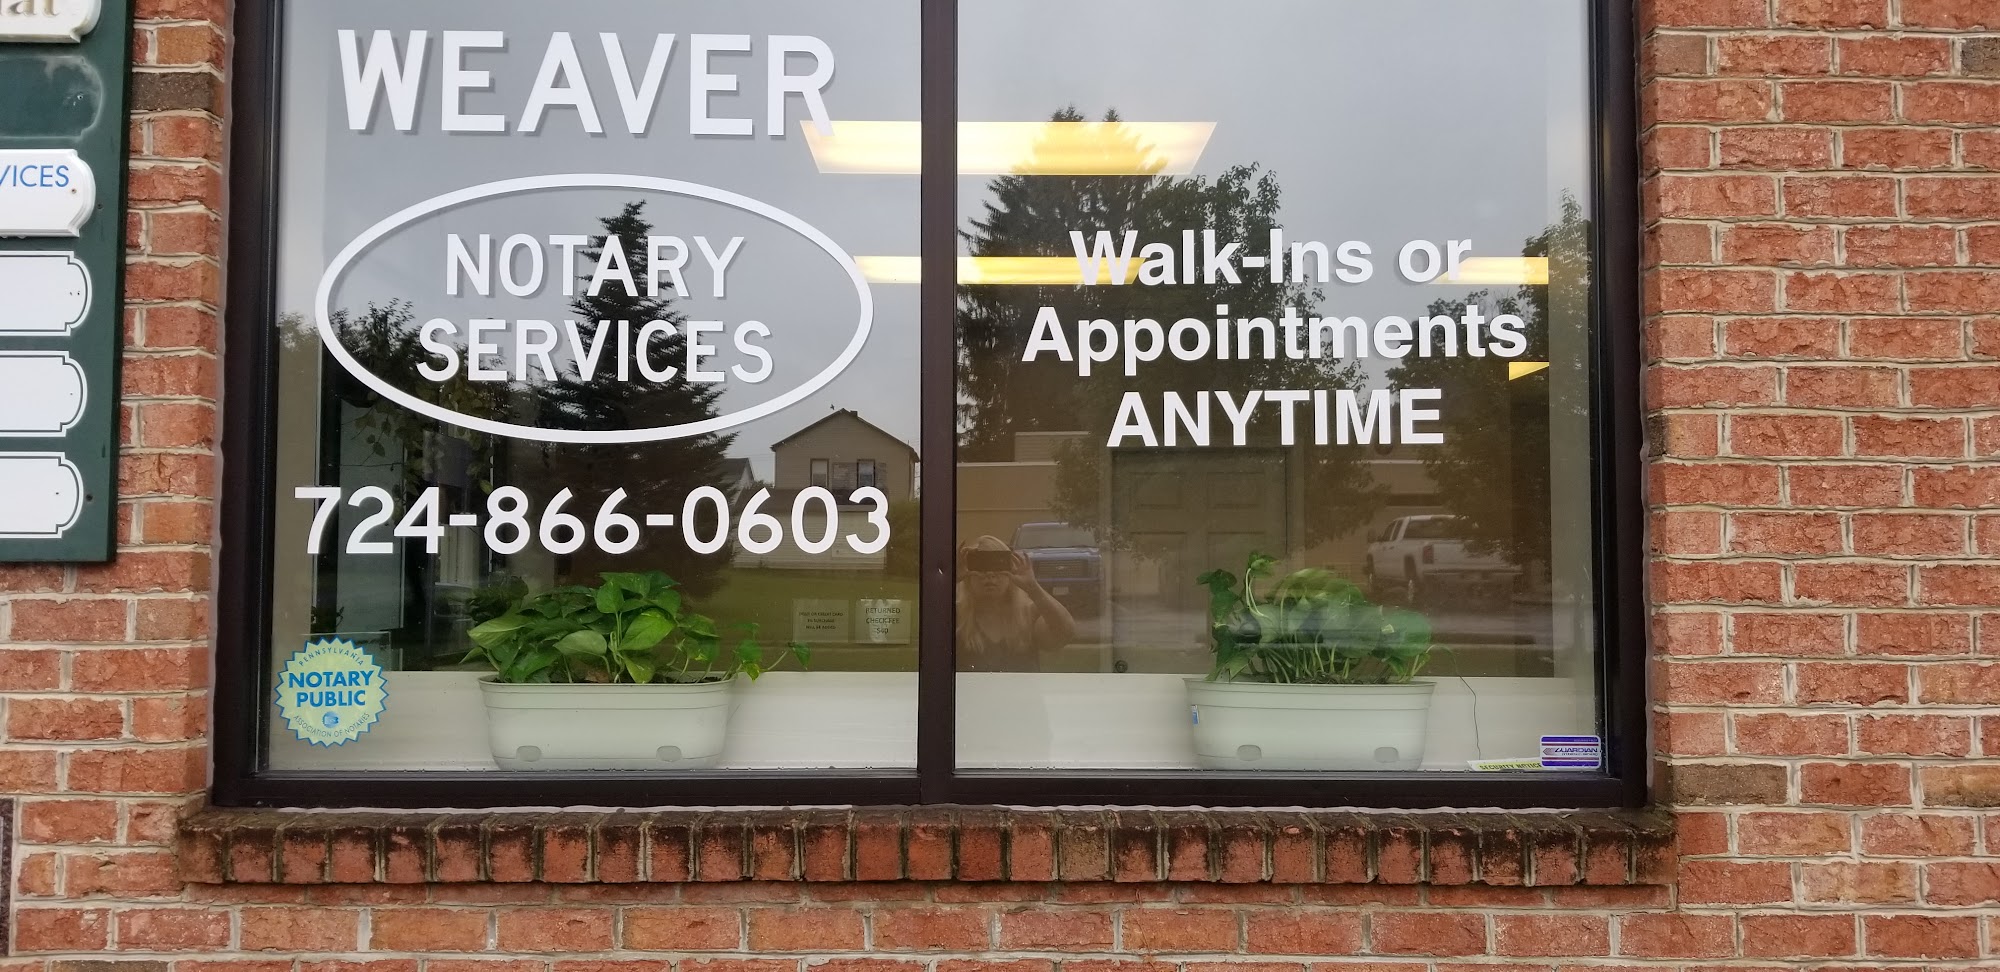 Weaver Notary Services 3143 Main St Suite 1, West Middlesex Pennsylvania 16159